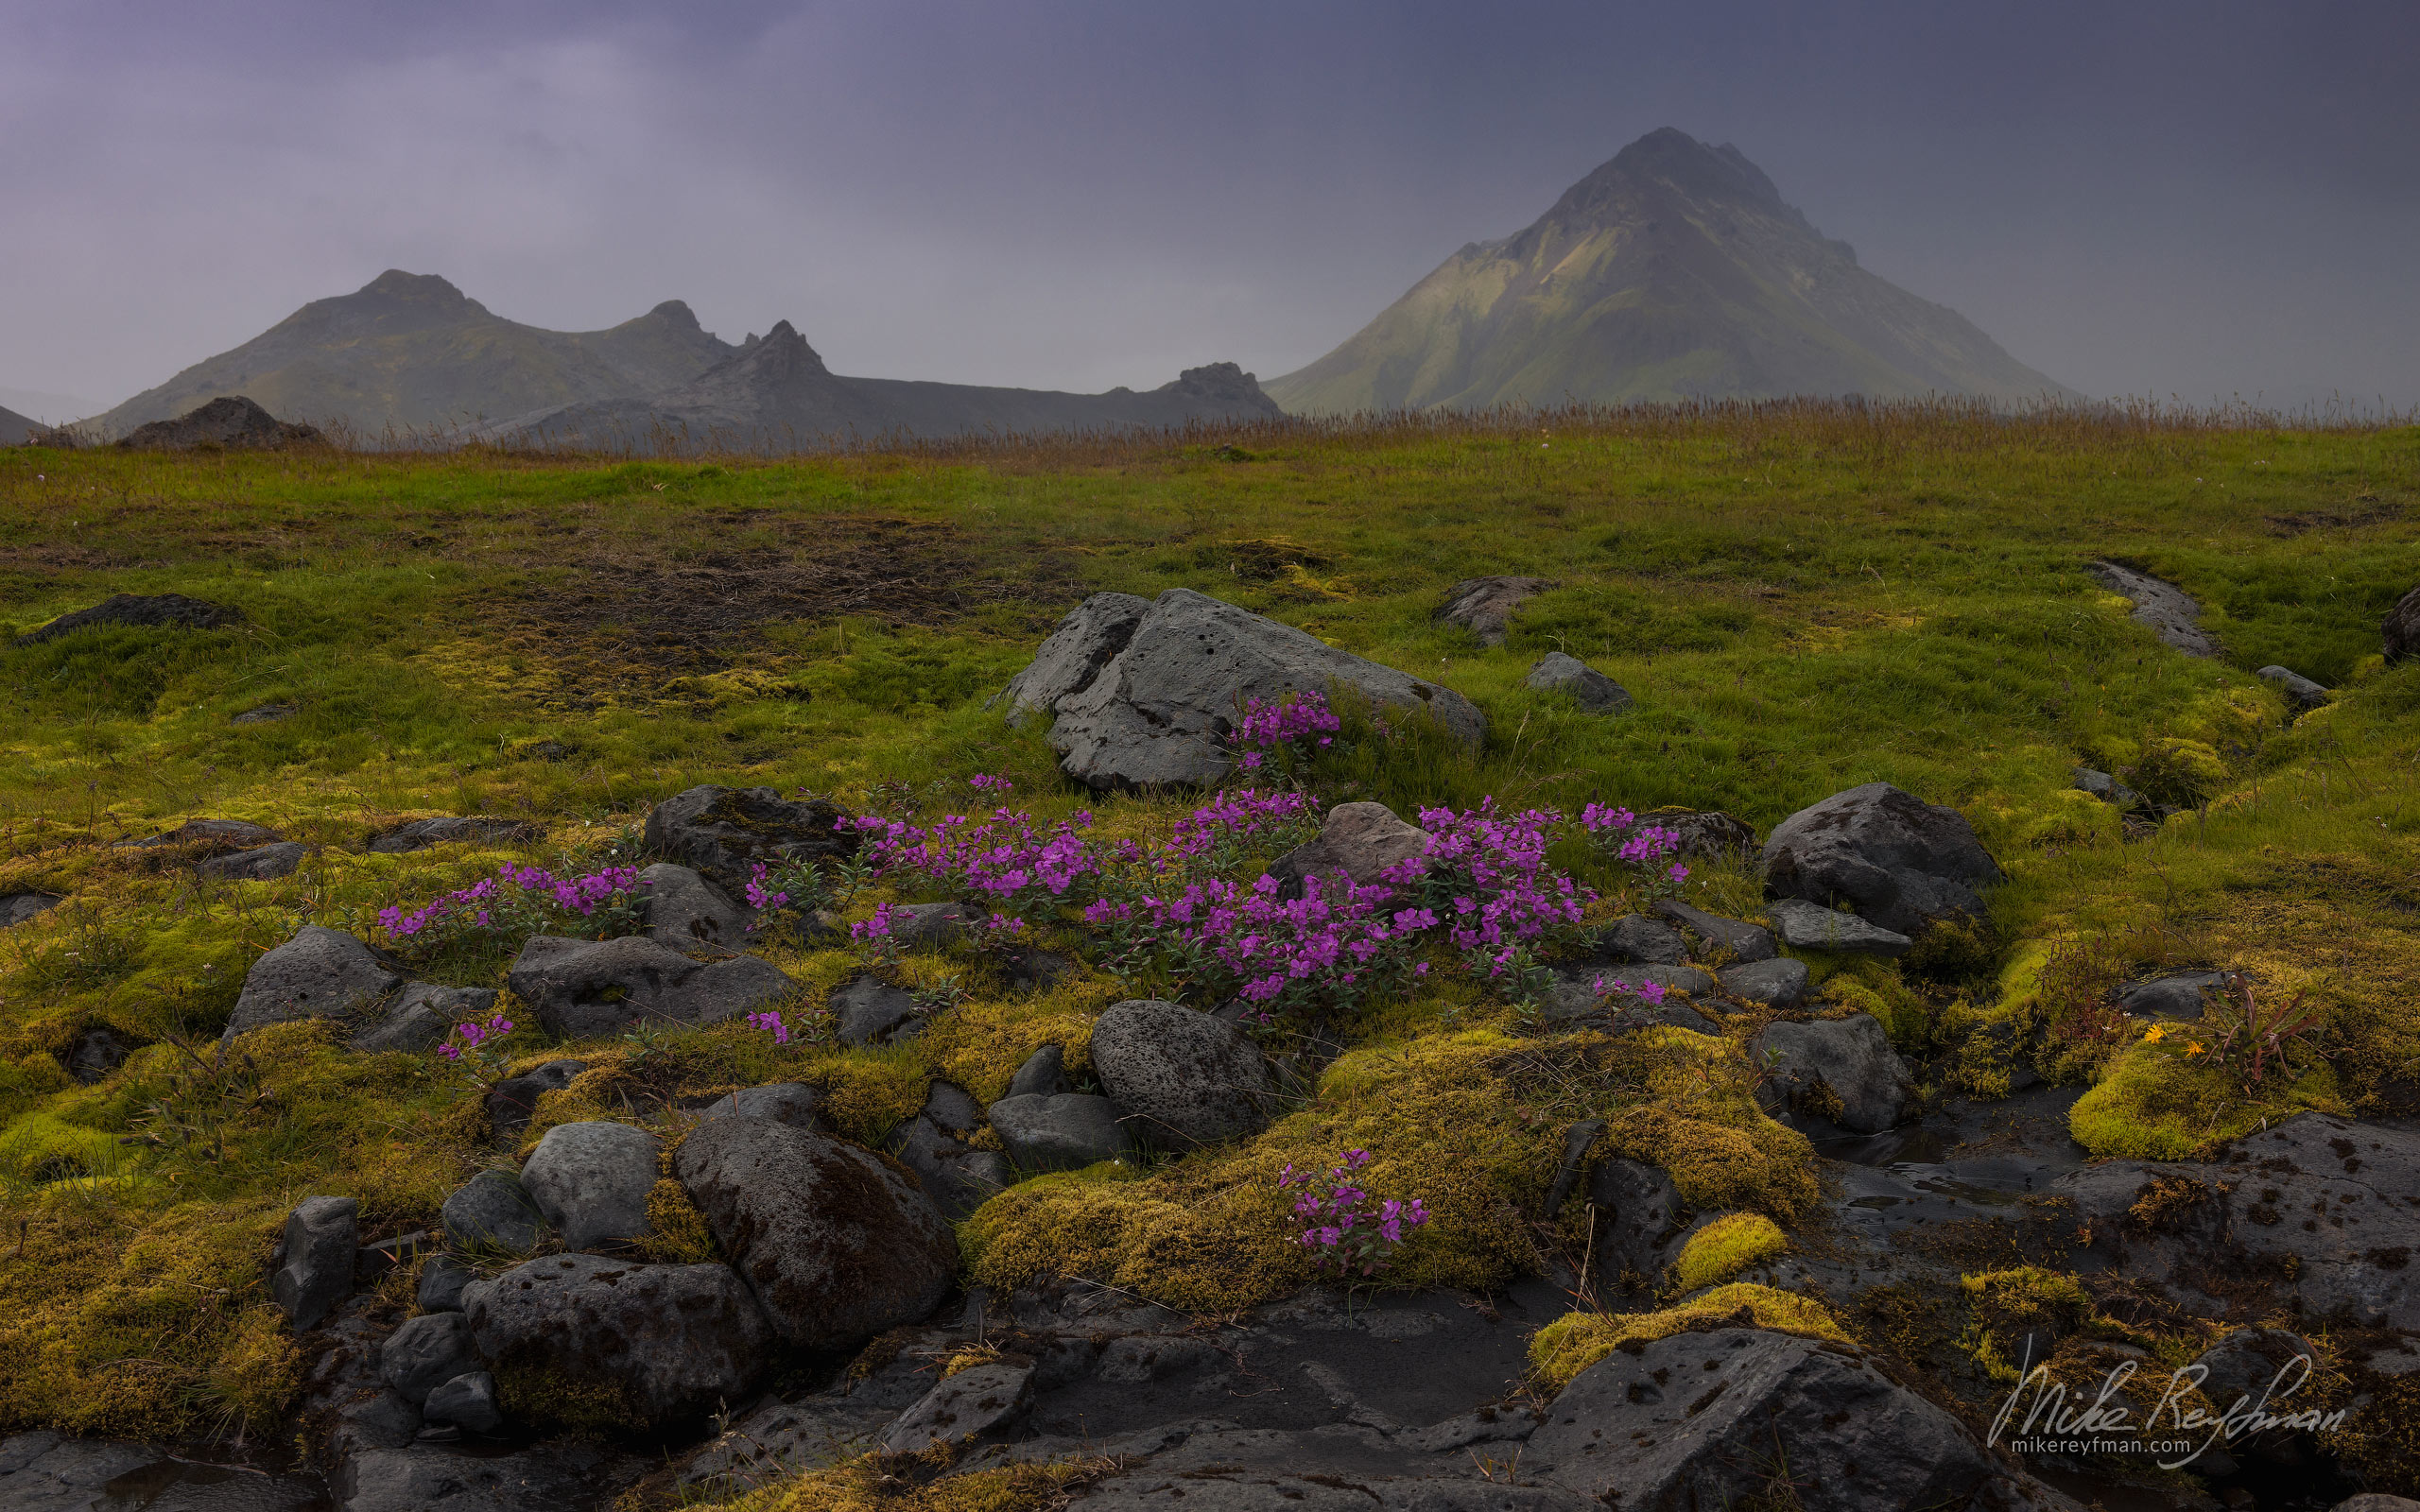 Mount Maelifell. Southern Fjallabak, Iceland. 128-IC-GP _O3X2841 - Rhyolite Mountains, Crater Lakes, Geothermal Areas, Lava Fields and Glacial Rivers. Iceland.  - Mike Reyfman Photography